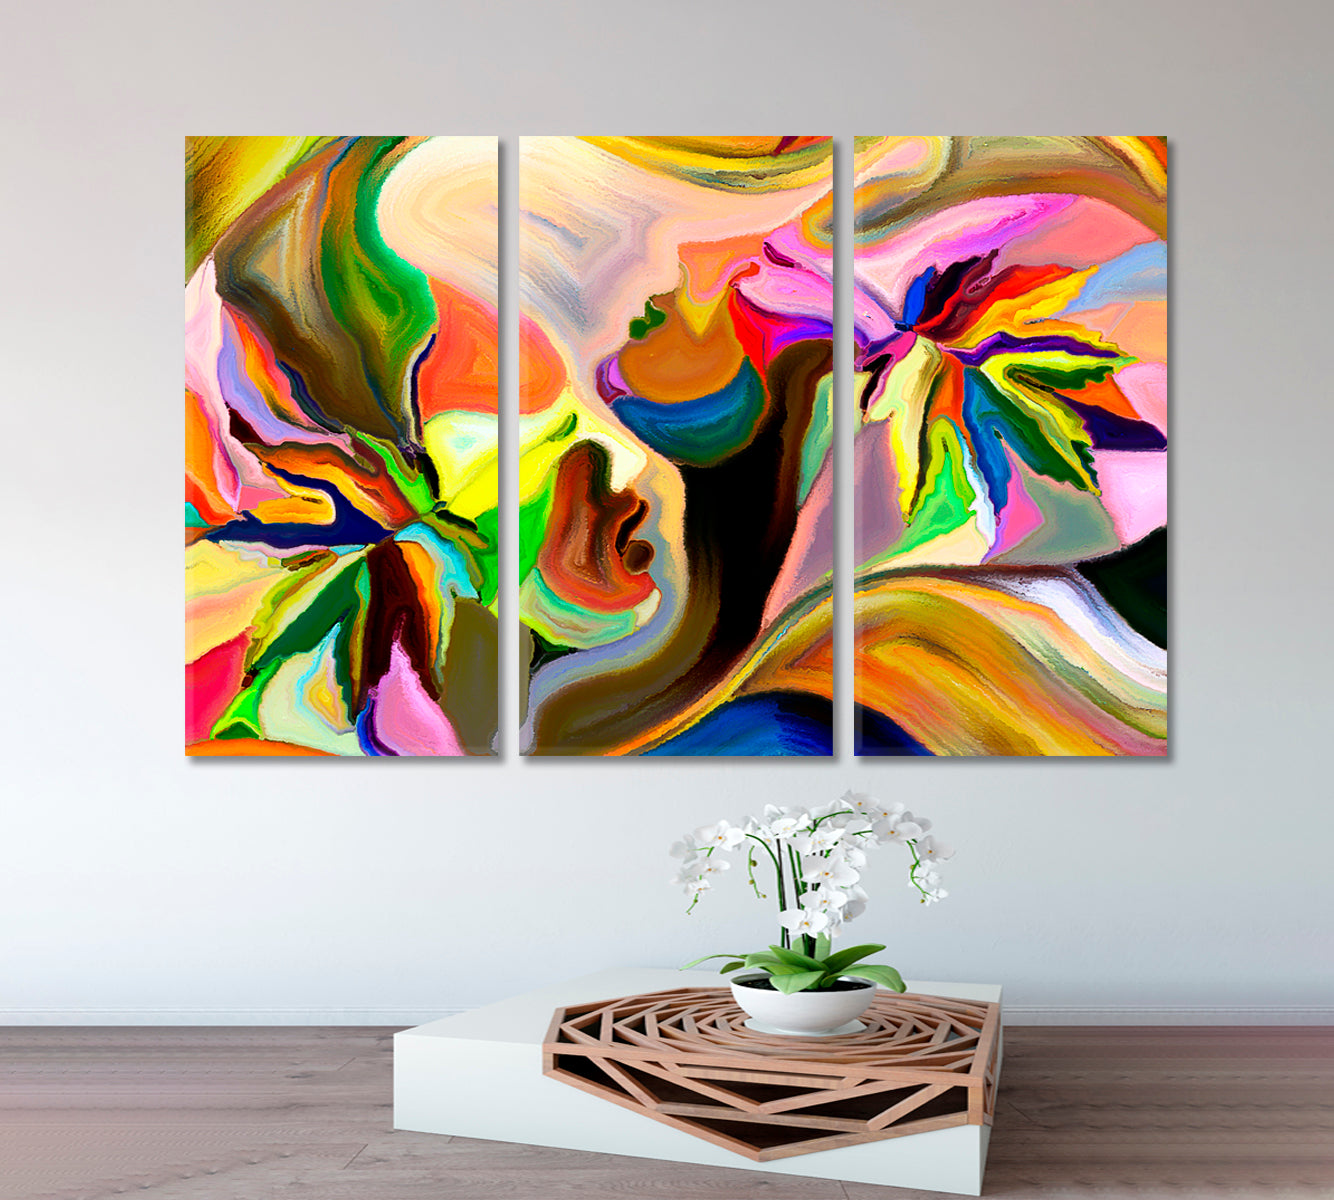 The Nature of Desire Abstract Art Print Artesty 3 panels 36" x 24" 